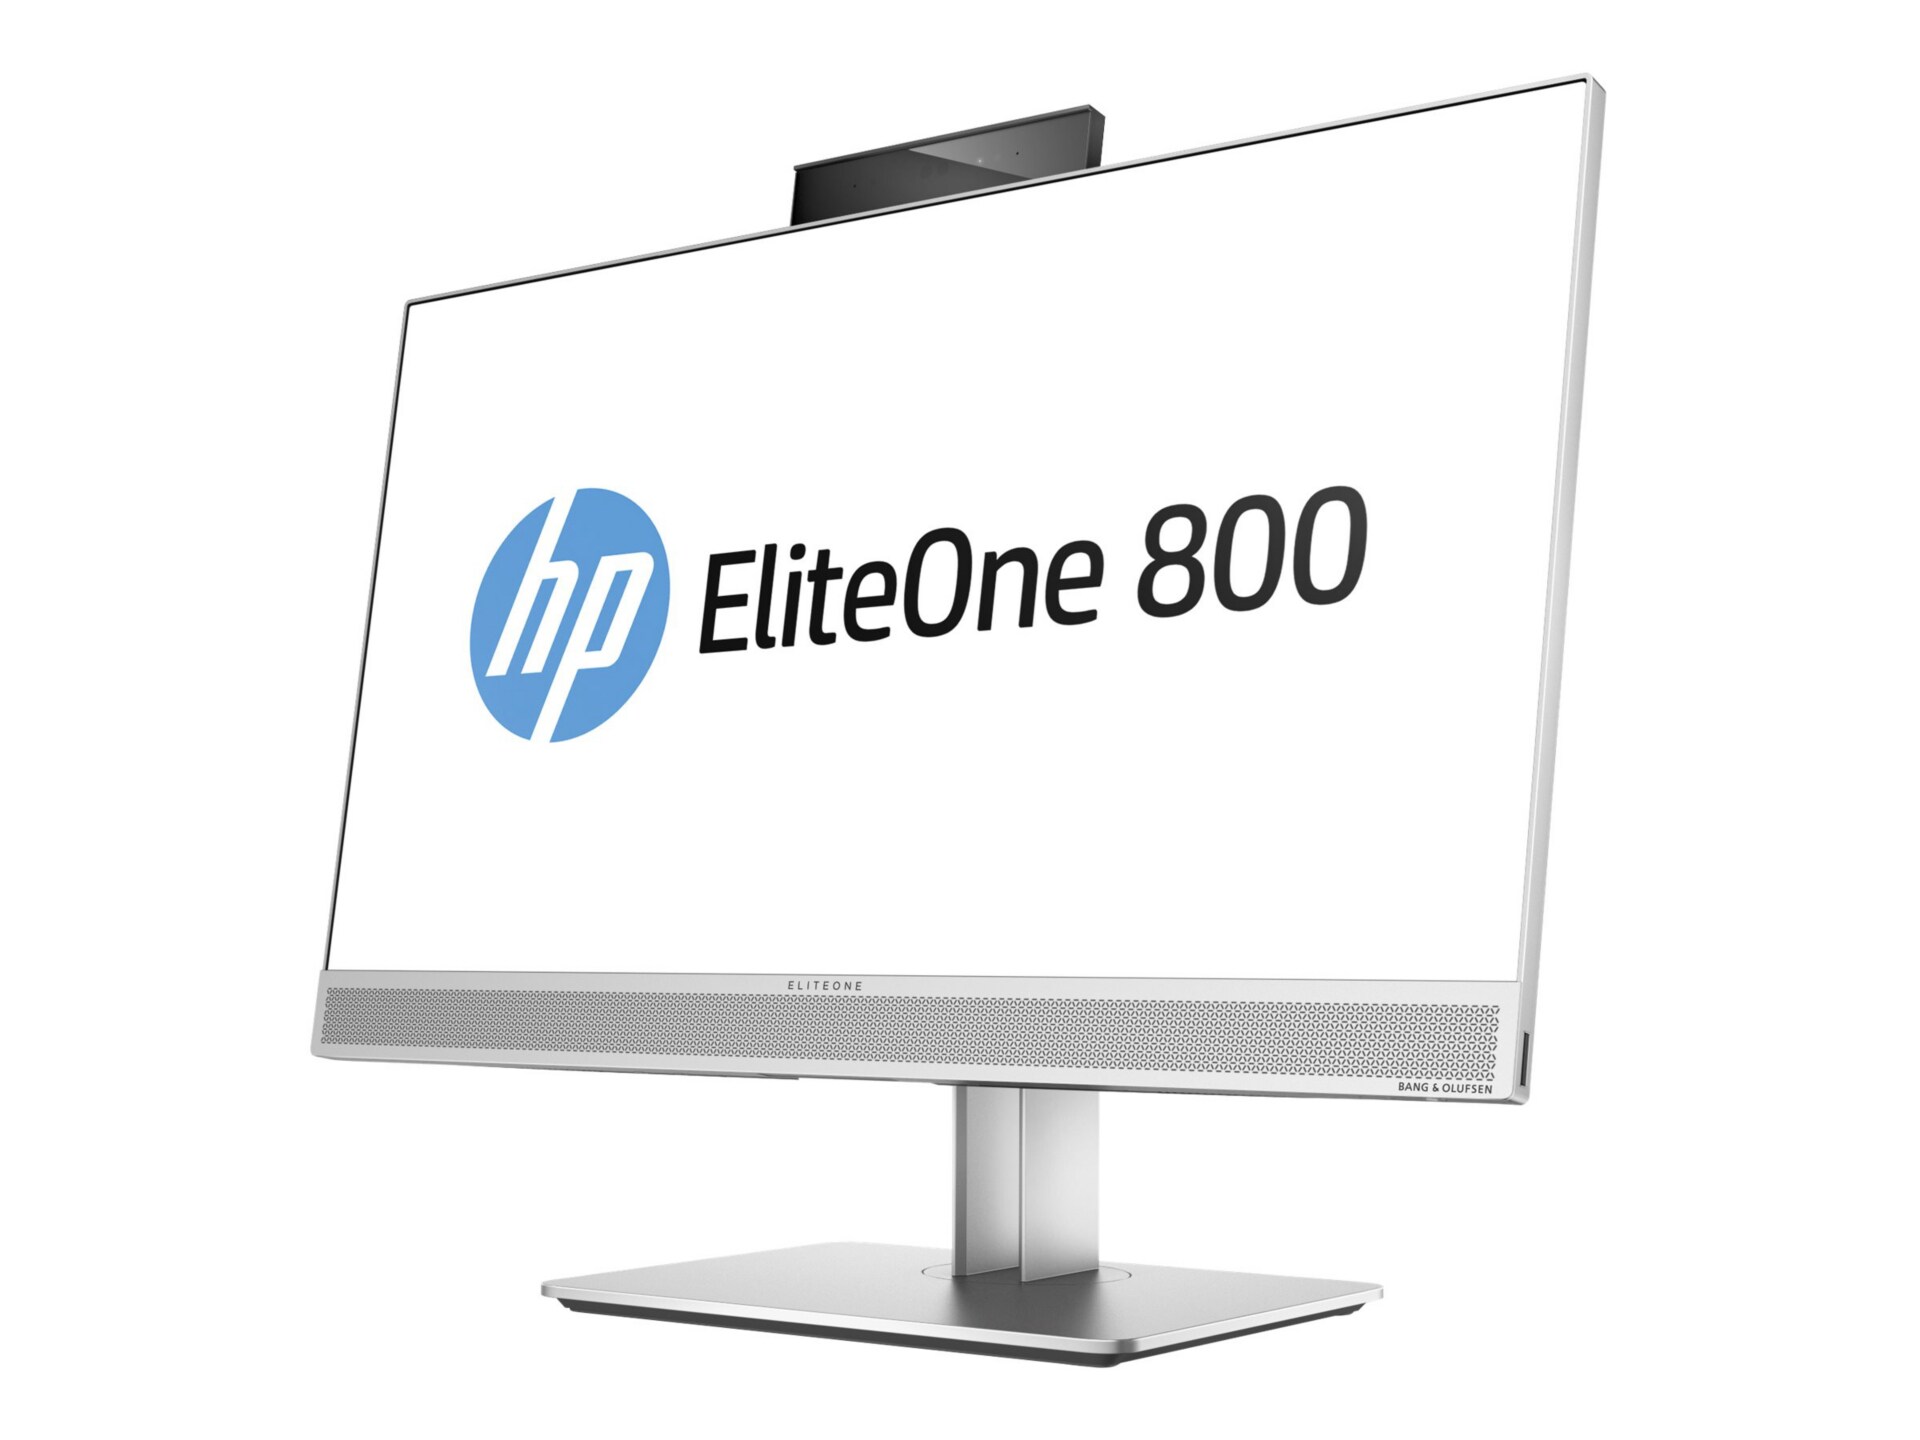 HP EliteOne 800 G3 - all-in-one - Core i7 7700 3.6 GHz - 8 GB - 1 TB - LED 23.8" - US